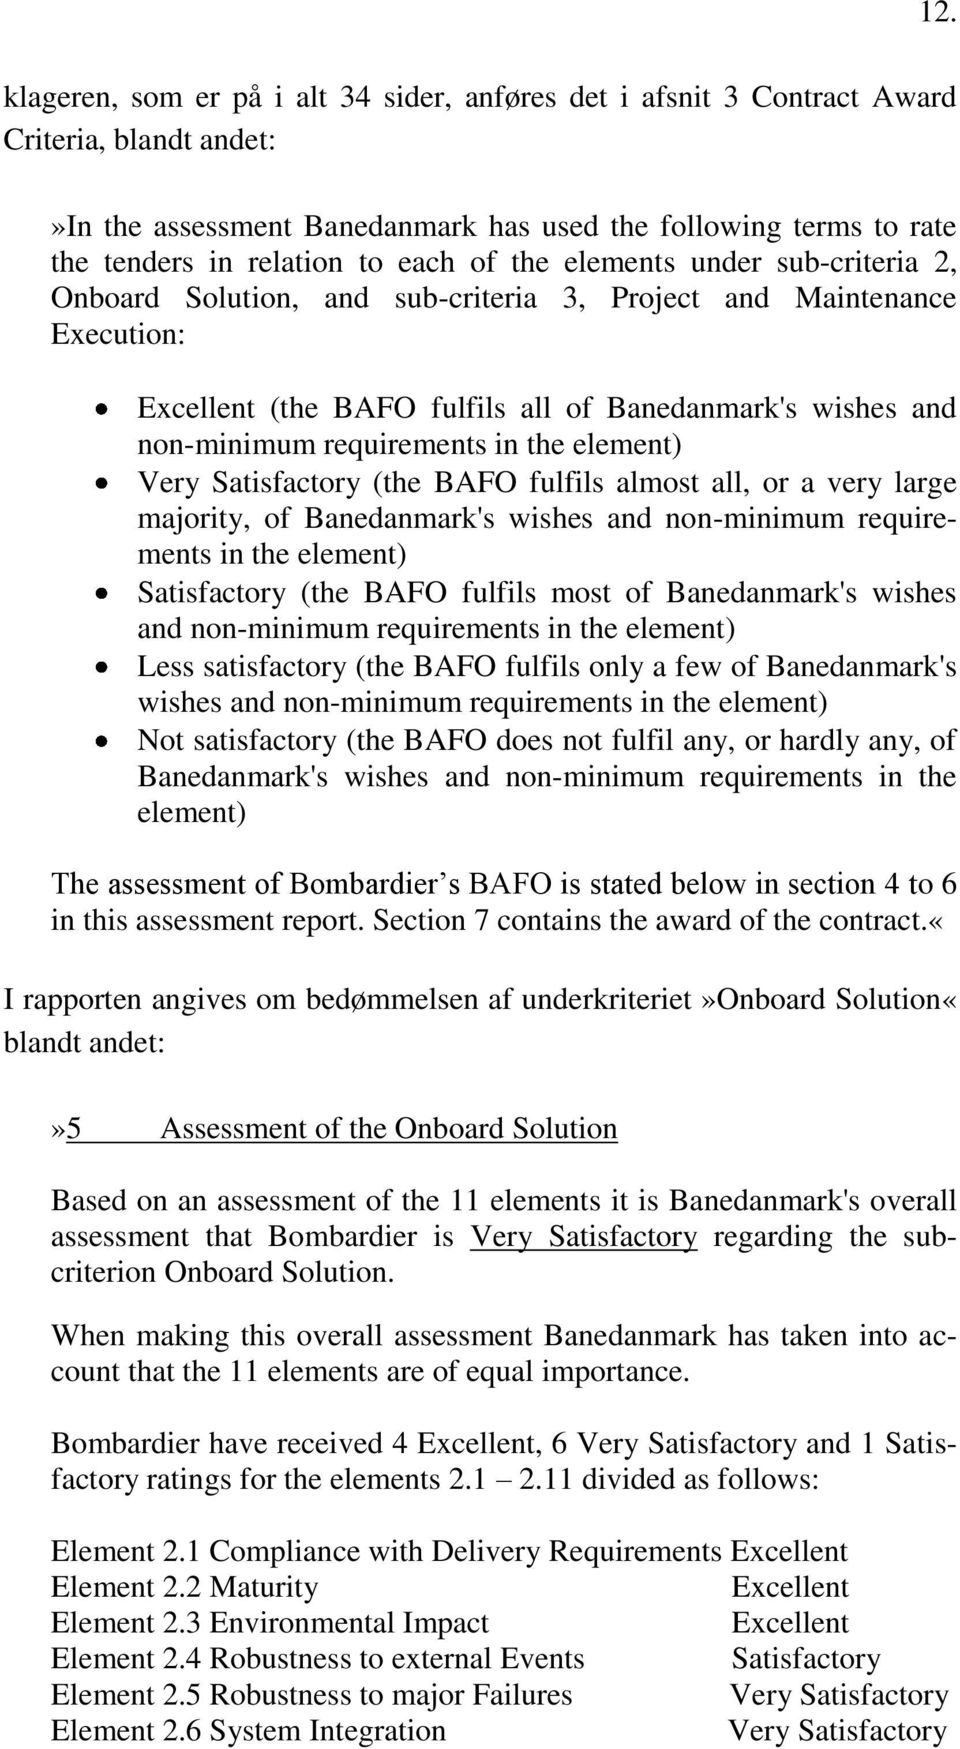 requirements in the element) Very Satisfactory (the BAFO fulfils almost all, or a very large majority, of Banedanmark's wishes and non-minimum requirements in the element) Satisfactory (the BAFO